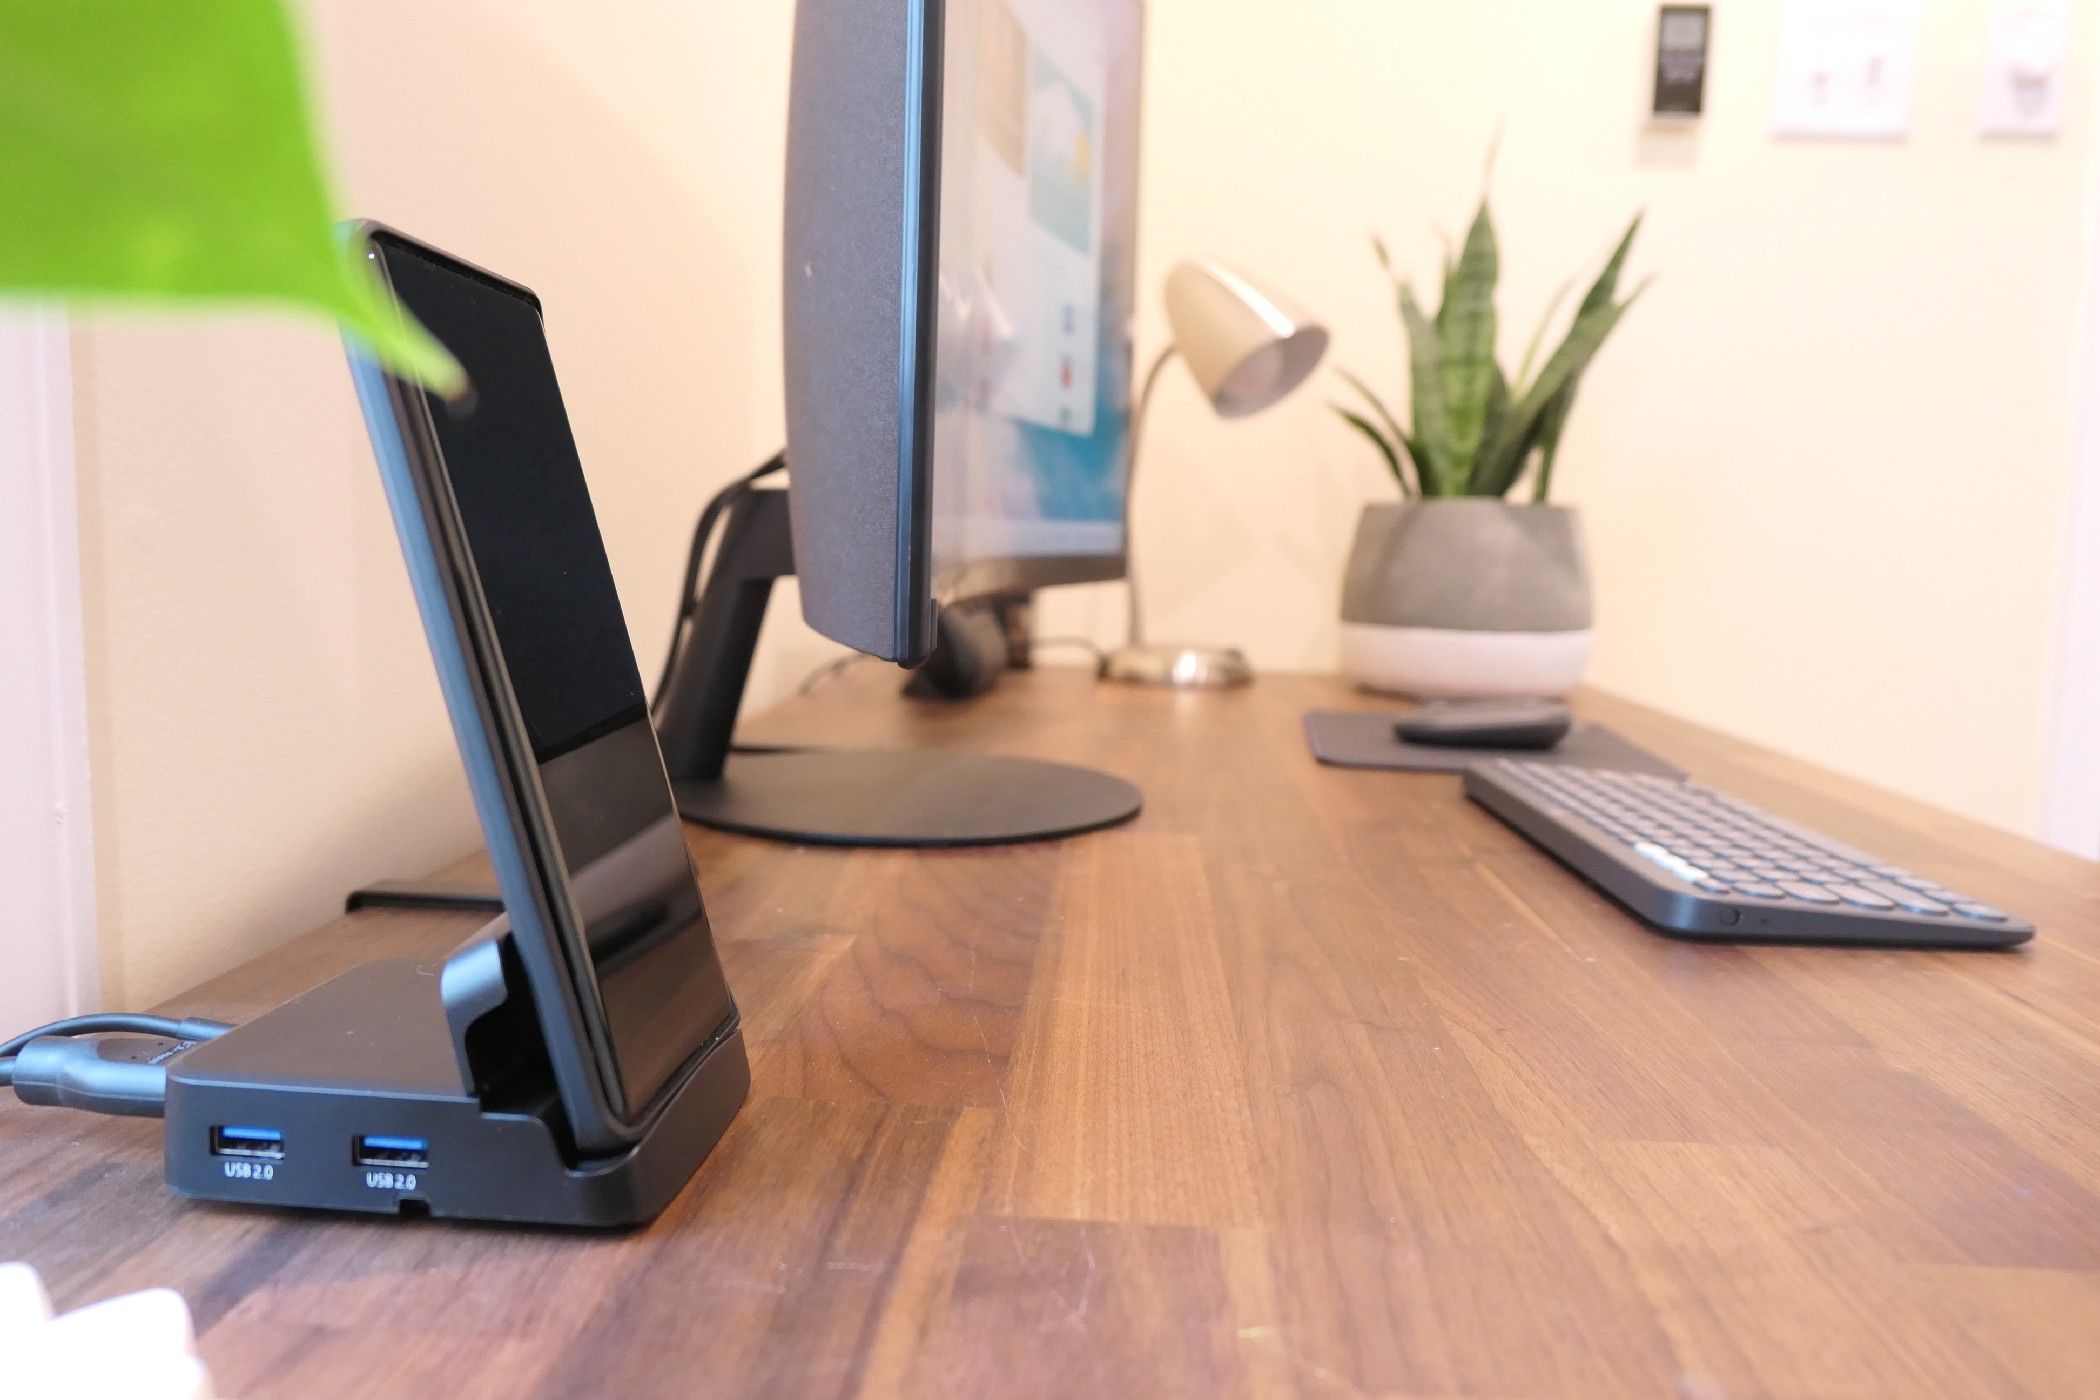 An Android phone docked next to a curved monitor.